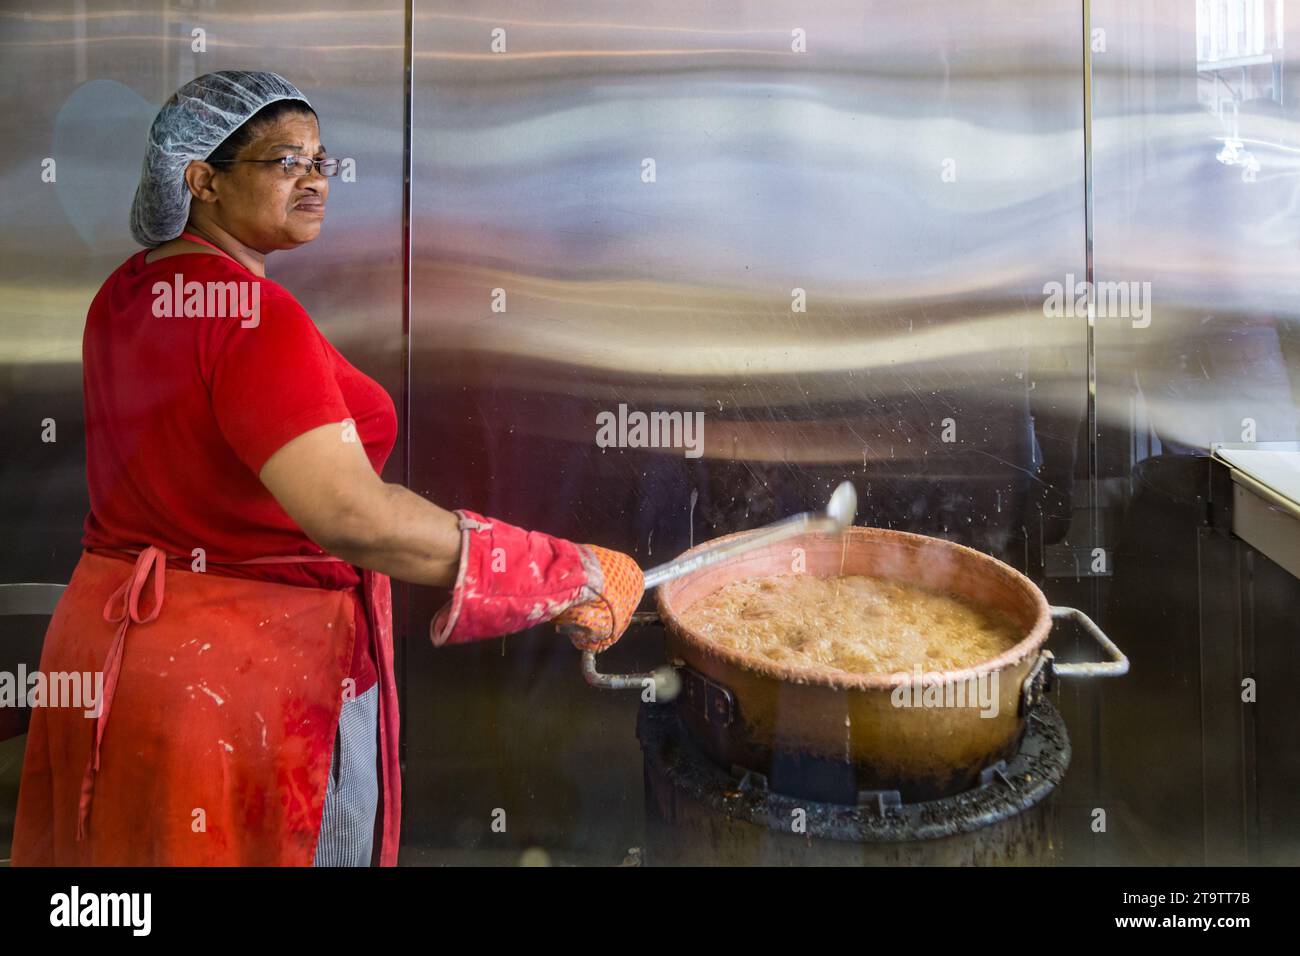 https://c8.alamy.com/comp/2T9TT7B/black-woman-stirring-boiling-pot-while-making-praline-candy-in-the-french-quarter-of-new-orleans-louisiana-2T9TT7B.jpg